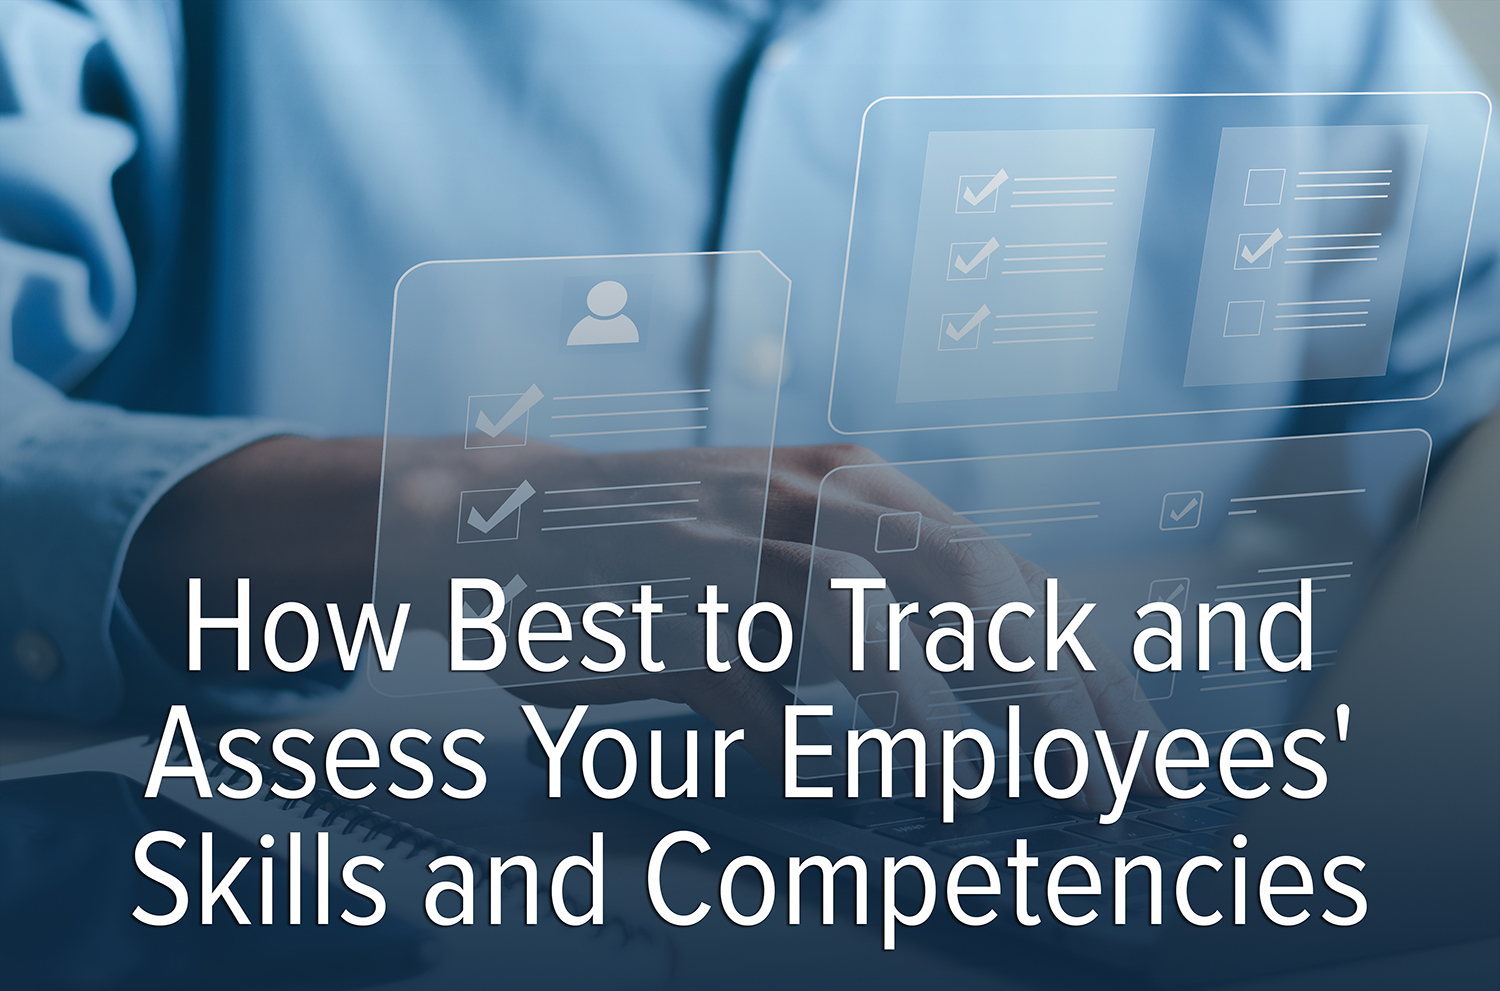 competency checklists and skills tracking for employees; workforce development